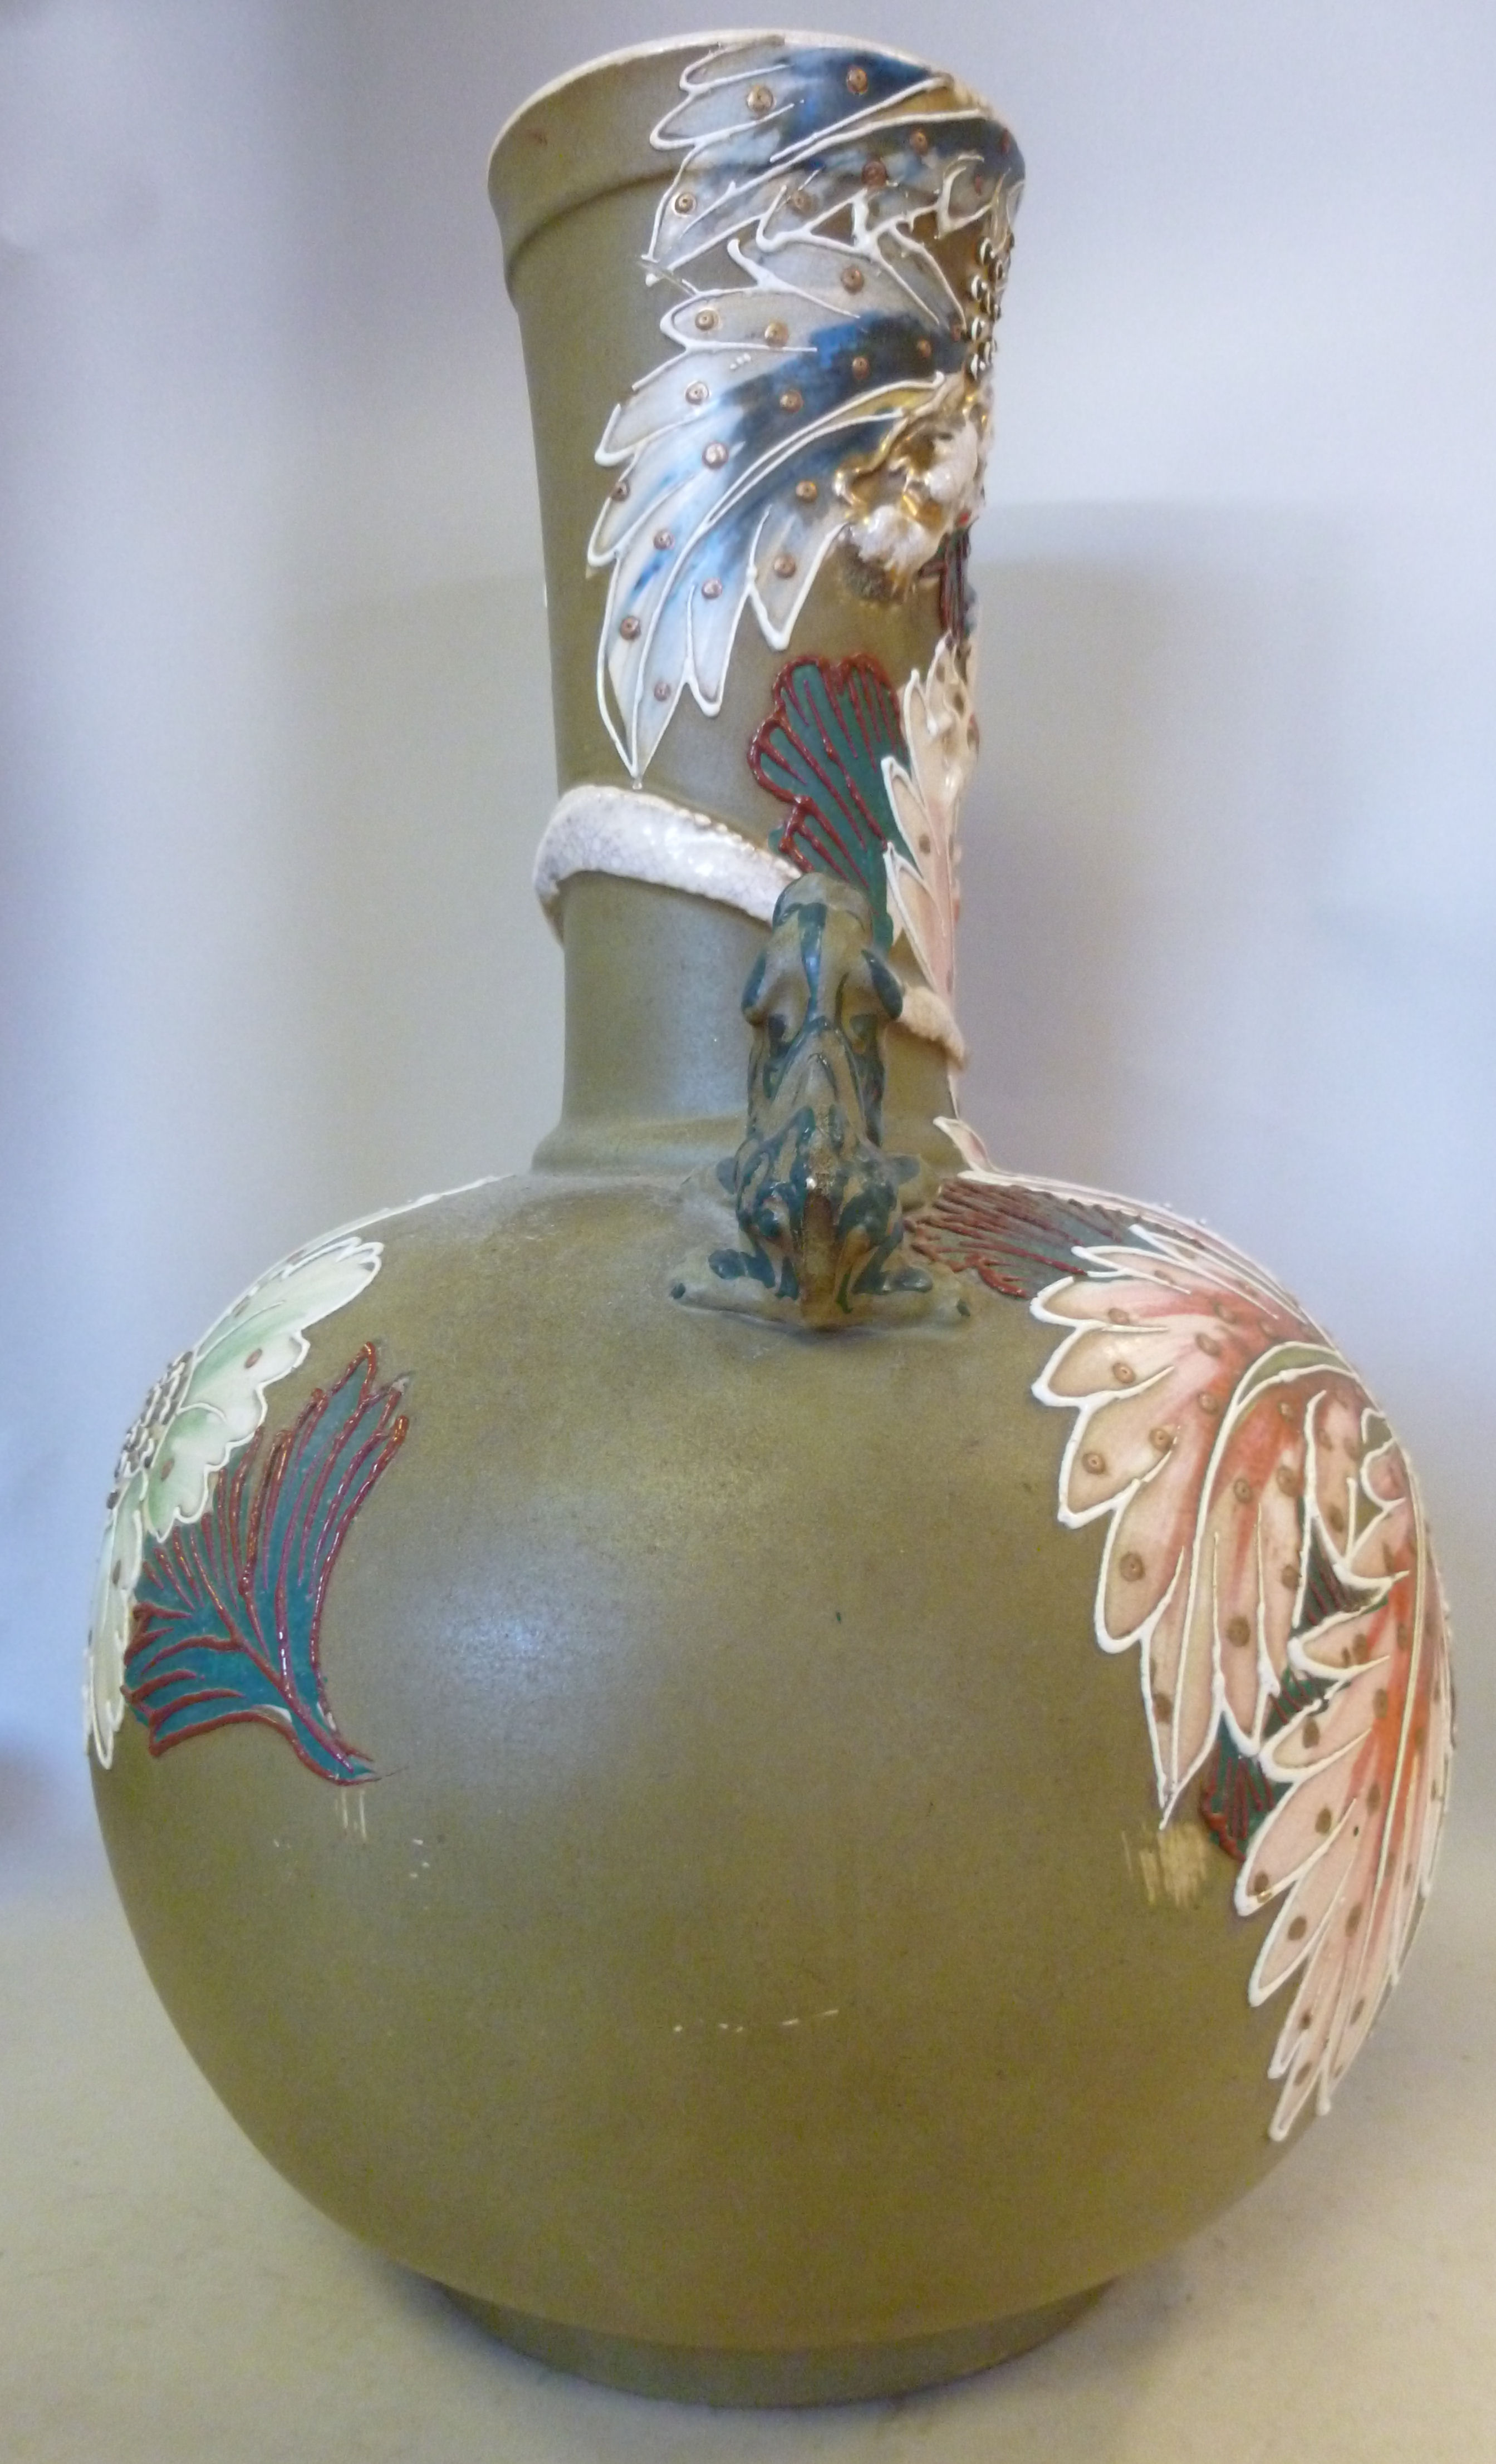 An early 20thC Japanese earthenware bott - Image 4 of 7